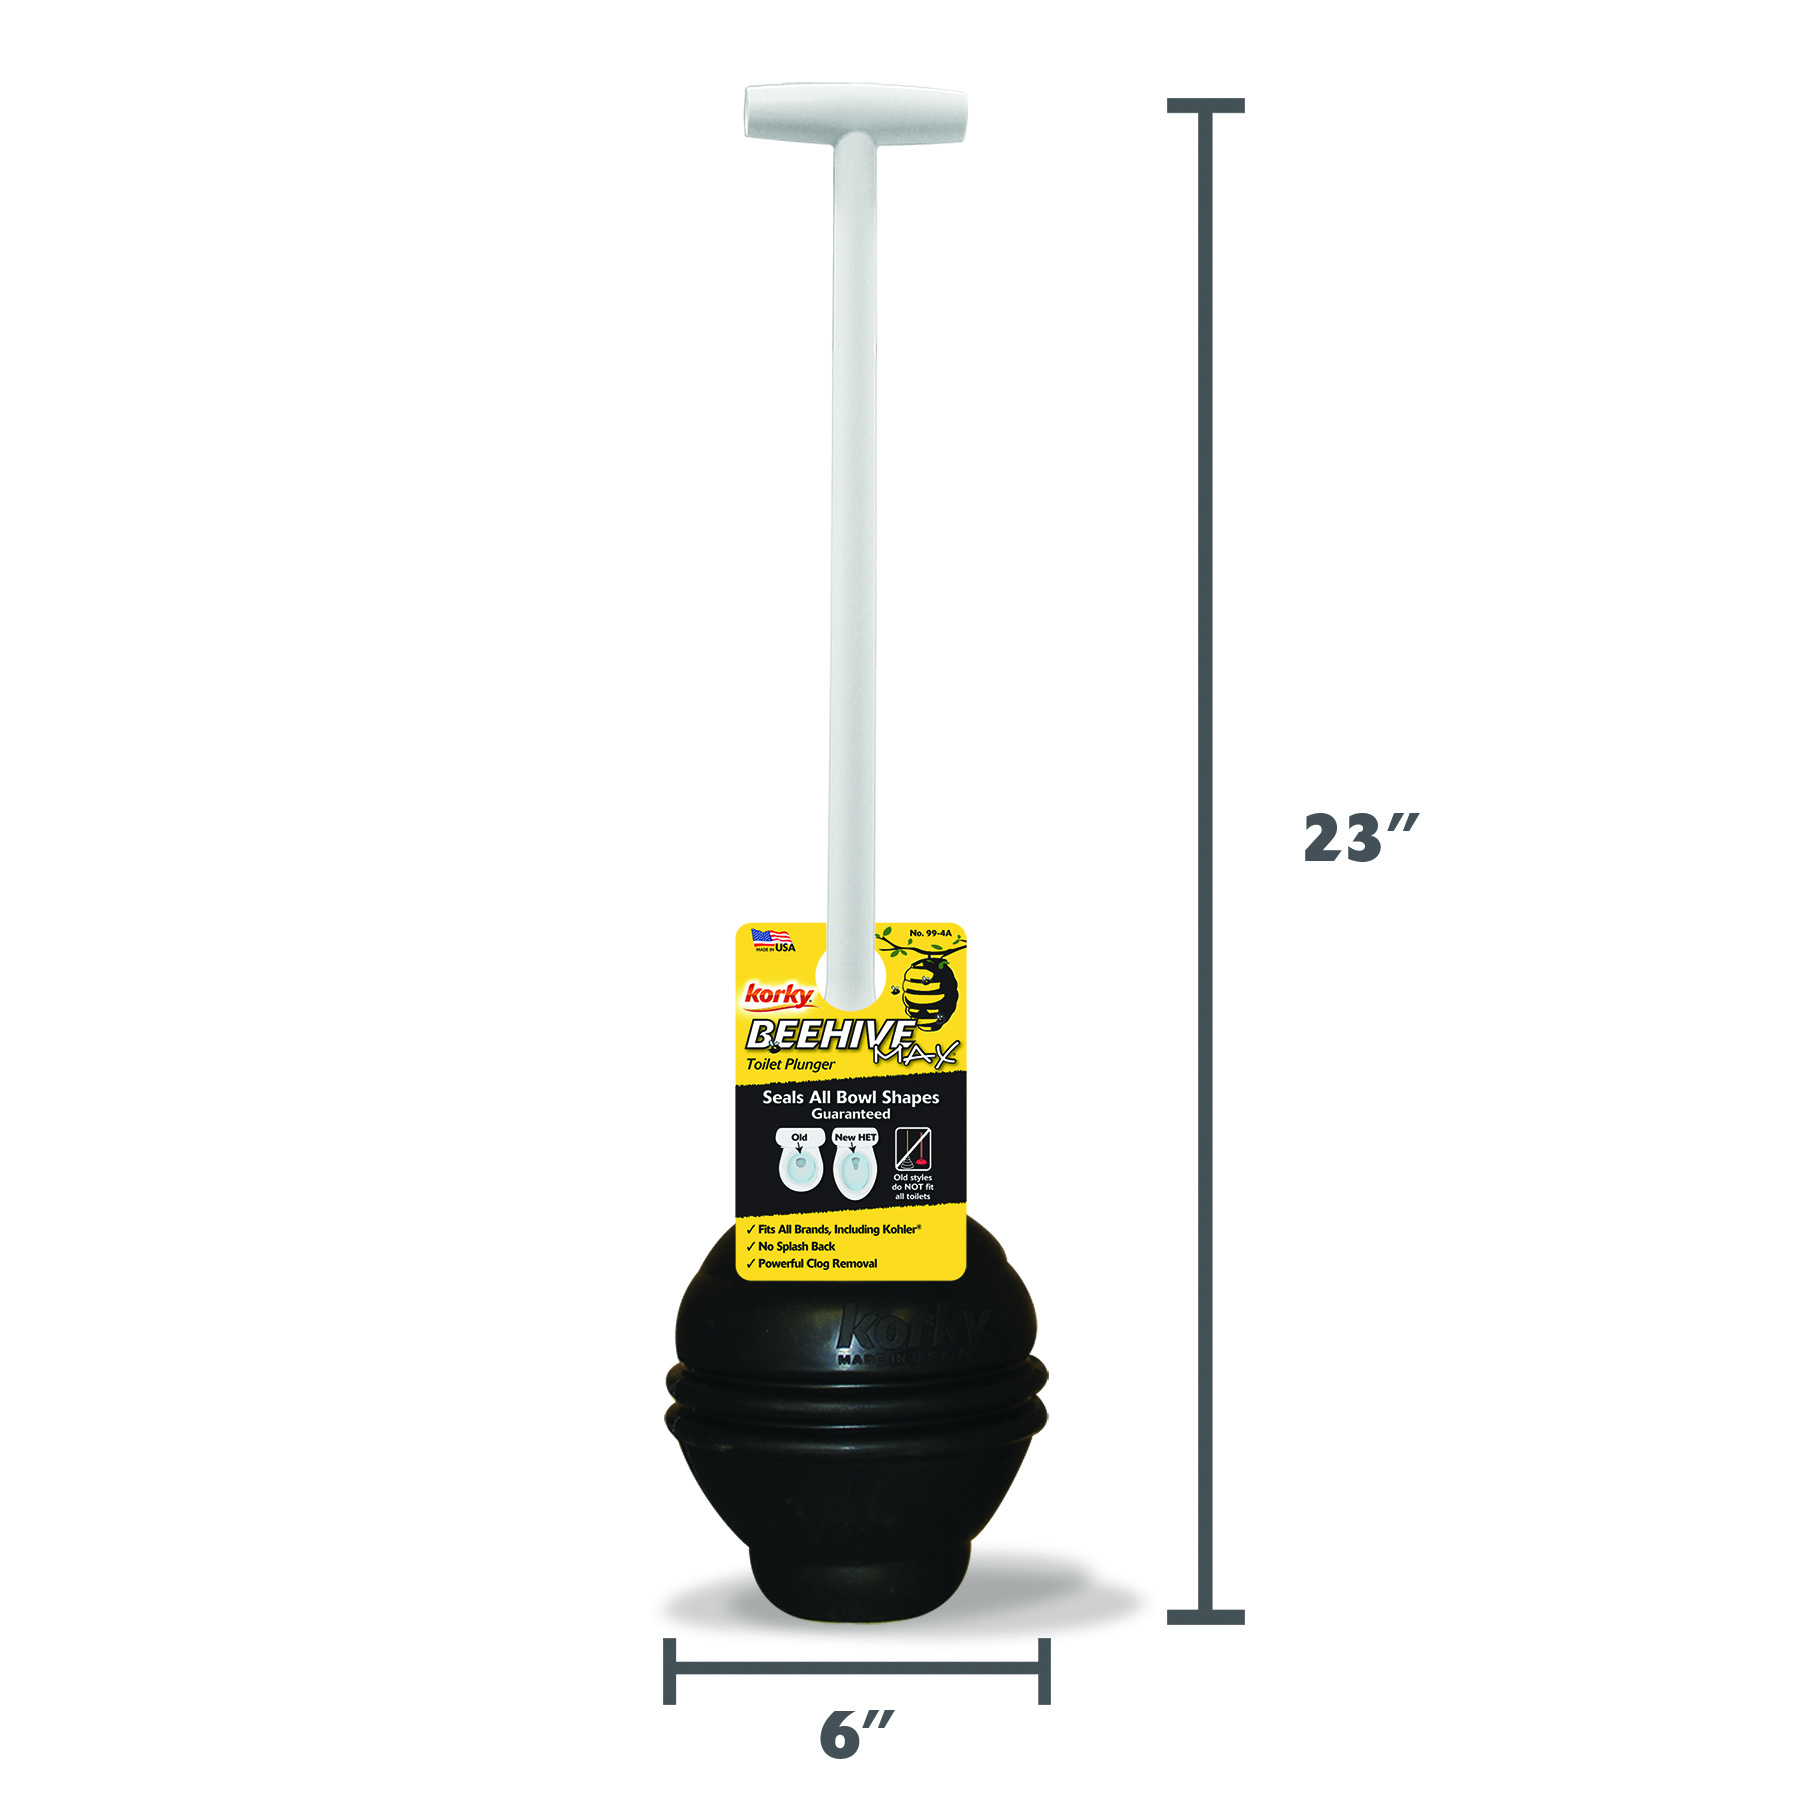 Beehive Max Toilet Plunger Dimensions